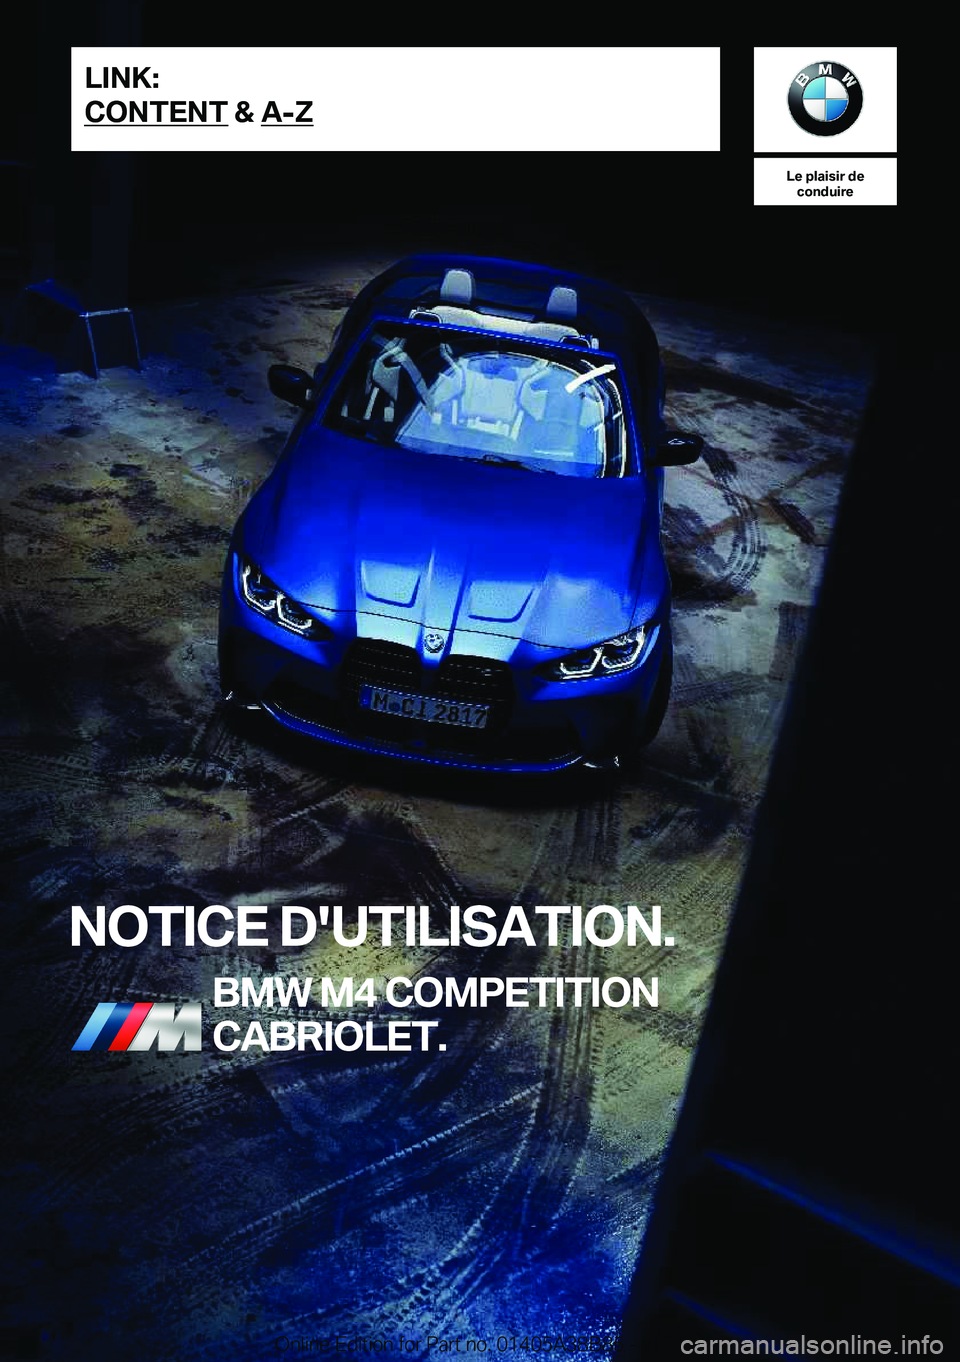 BMW M4 2022  Notices Demploi (in French) �L�e��p�l�a�i�s�i�r��d�e�c�o�n�d�u�i�r�e
�N�O�T�I�C�E��D�'�U�T�I�L�I�S�A�T�I�O�N�.�B�M�W��M�4��C�O�M�P�E�T�I�T�I�O�N
�C�A�B�R�I�O�L�E�T�.�L�I�N�K�:
�C�O�N�T�E�N�T��&��A�-�Z�O�n�l�i�n�e��E�